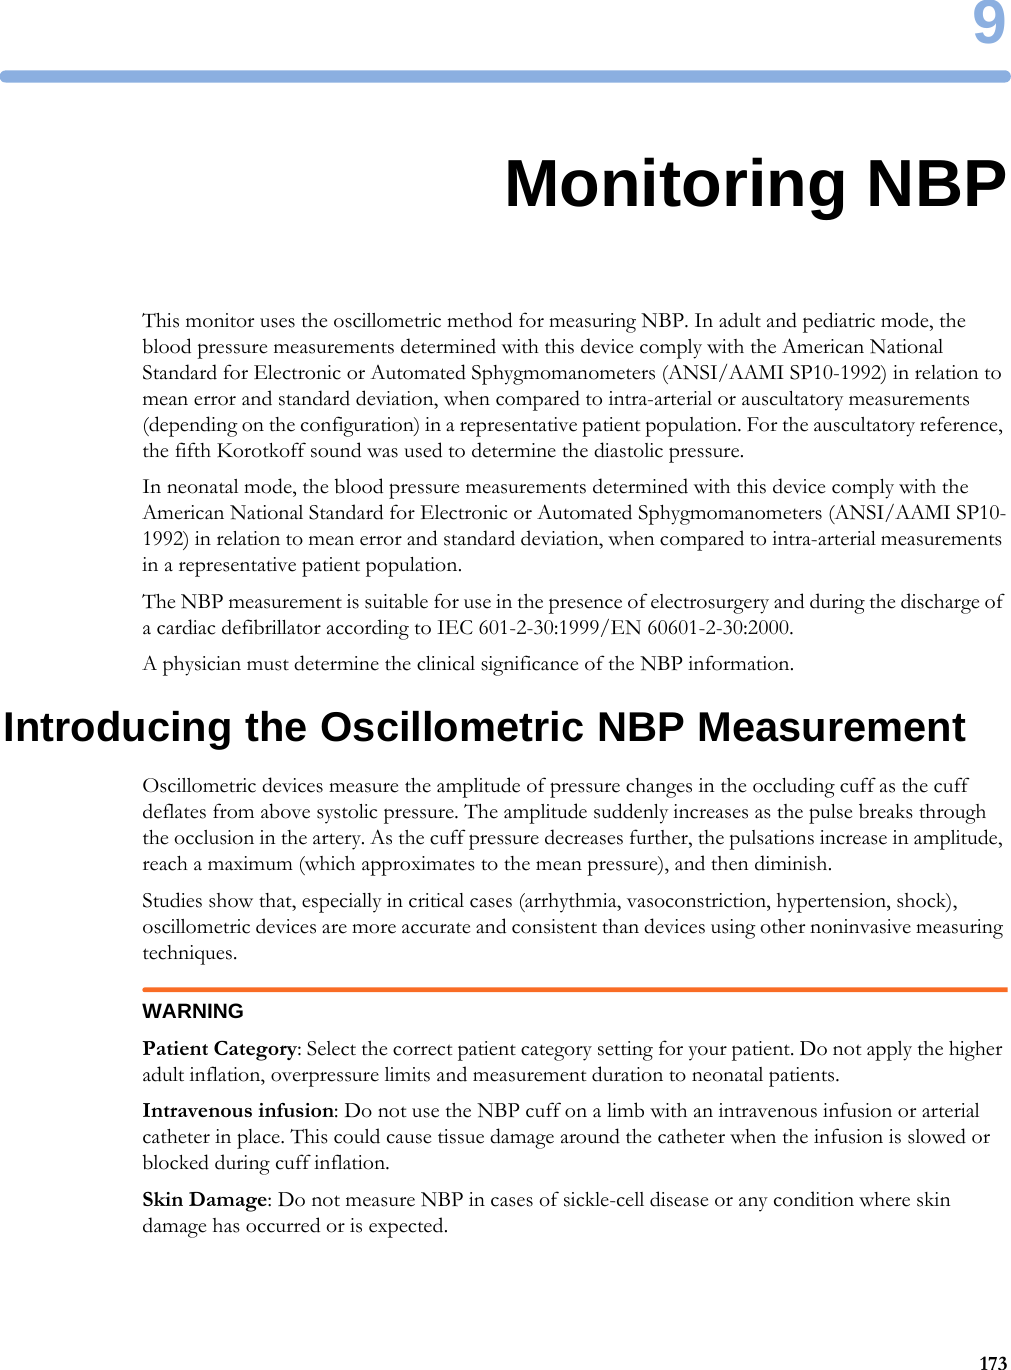 91739Monitoring NBPThis monitor uses the oscillometric method for measuring NBP. In adult and pediatric mode, the blood pressure measurements determined with this device comply with the American National Standard for Electronic or Automated Sphygmomanometers (ANSI/AAMI SP10-1992) in relation to mean error and standard deviation, when compared to intra-arterial or auscultatory measurements (depending on the configuration) in a representative patient population. For the auscultatory reference, the fifth Korotkoff sound was used to determine the diastolic pressure.In neonatal mode, the blood pressure measurements determined with this device comply with the American National Standard for Electronic or Automated Sphygmomanometers (ANSI/AAMI SP10-1992) in relation to mean error and standard deviation, when compared to intra-arterial measurements in a representative patient population.The NBP measurement is suitable for use in the presence of electrosurgery and during the discharge of a cardiac defibrillator according to IEC 601-2-30:1999/EN 60601-2-30:2000.A physician must determine the clinical significance of the NBP information.Introducing the Oscillometric NBP MeasurementOscillometric devices measure the amplitude of pressure changes in the occluding cuff as the cuff deflates from above systolic pressure. The amplitude suddenly increases as the pulse breaks through the occlusion in the artery. As the cuff pressure decreases further, the pulsations increase in amplitude, reach a maximum (which approximates to the mean pressure), and then diminish.Studies show that, especially in critical cases (arrhythmia, vasoconstriction, hypertension, shock), oscillometric devices are more accurate and consistent than devices using other noninvasive measuring techniques.WARNINGPatient Category: Select the correct patient category setting for your patient. Do not apply the higher adult inflation, overpressure limits and measurement duration to neonatal patients.Intravenous infusion: Do not use the NBP cuff on a limb with an intravenous infusion or arterial catheter in place. This could cause tissue damage around the catheter when the infusion is slowed or blocked during cuff inflation.Skin Damage: Do not measure NBP in cases of sickle-cell disease or any condition where skin damage has occurred or is expected.